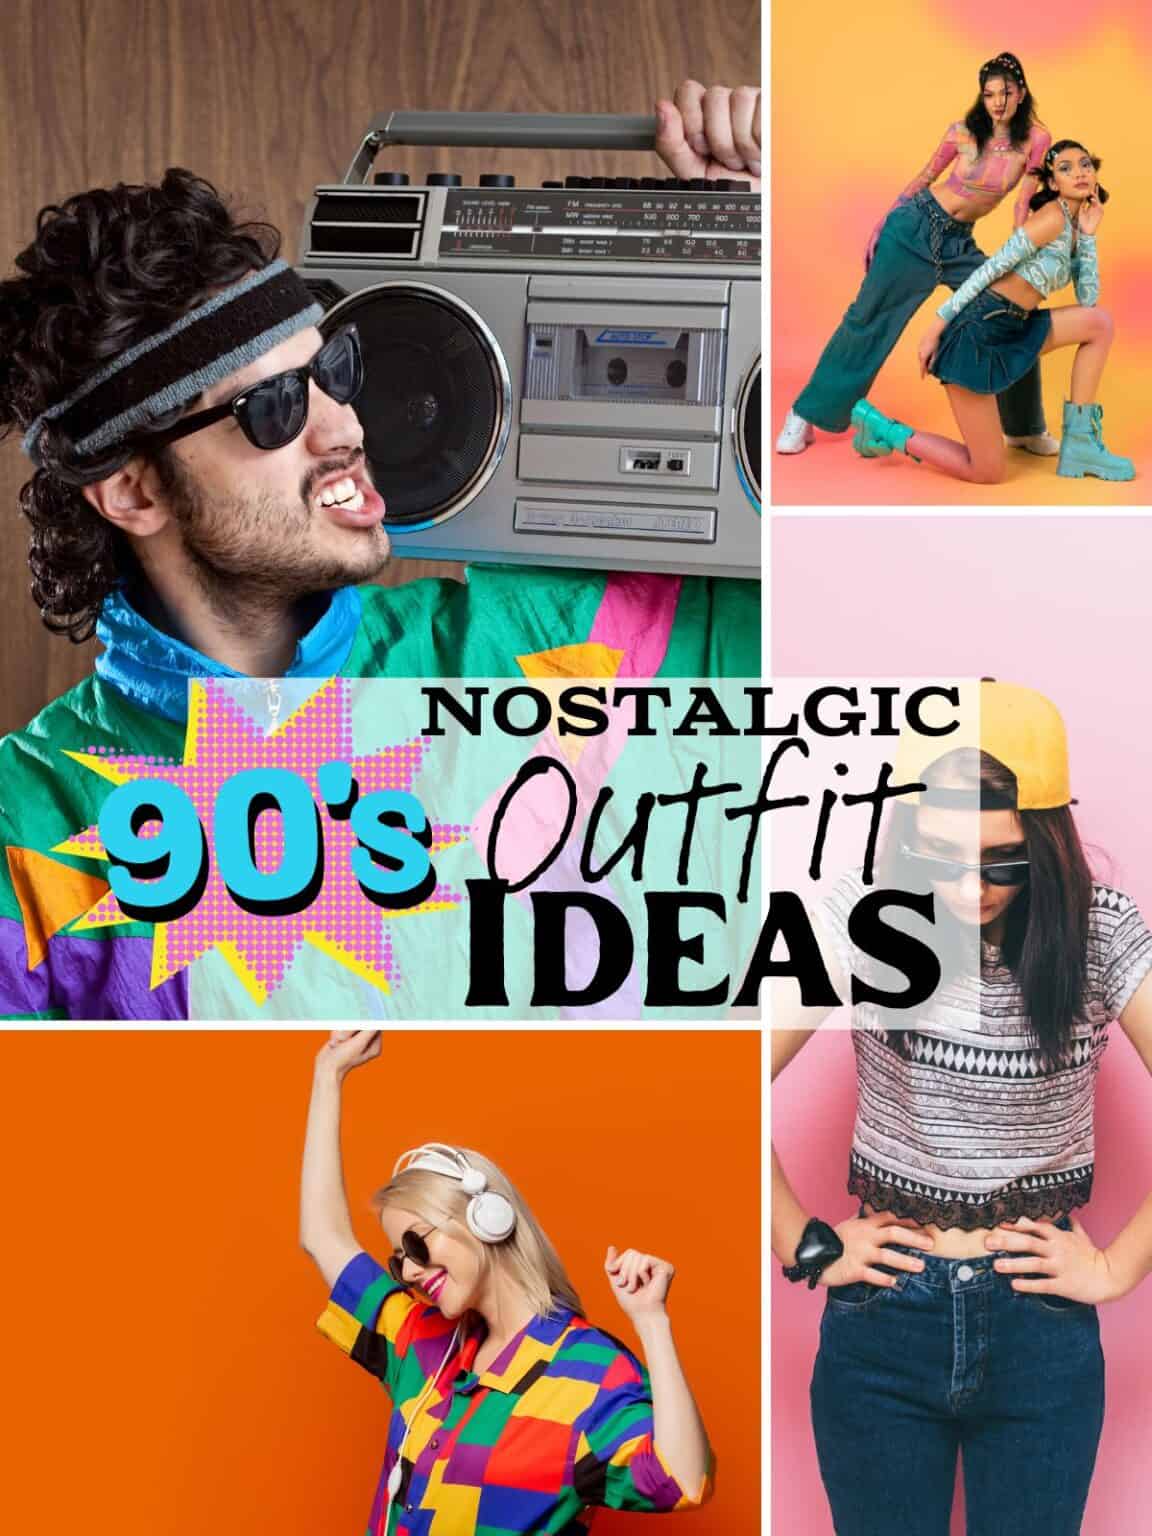 Outfits To Wear To A 90's Theme Party - Aleka's Get-Together